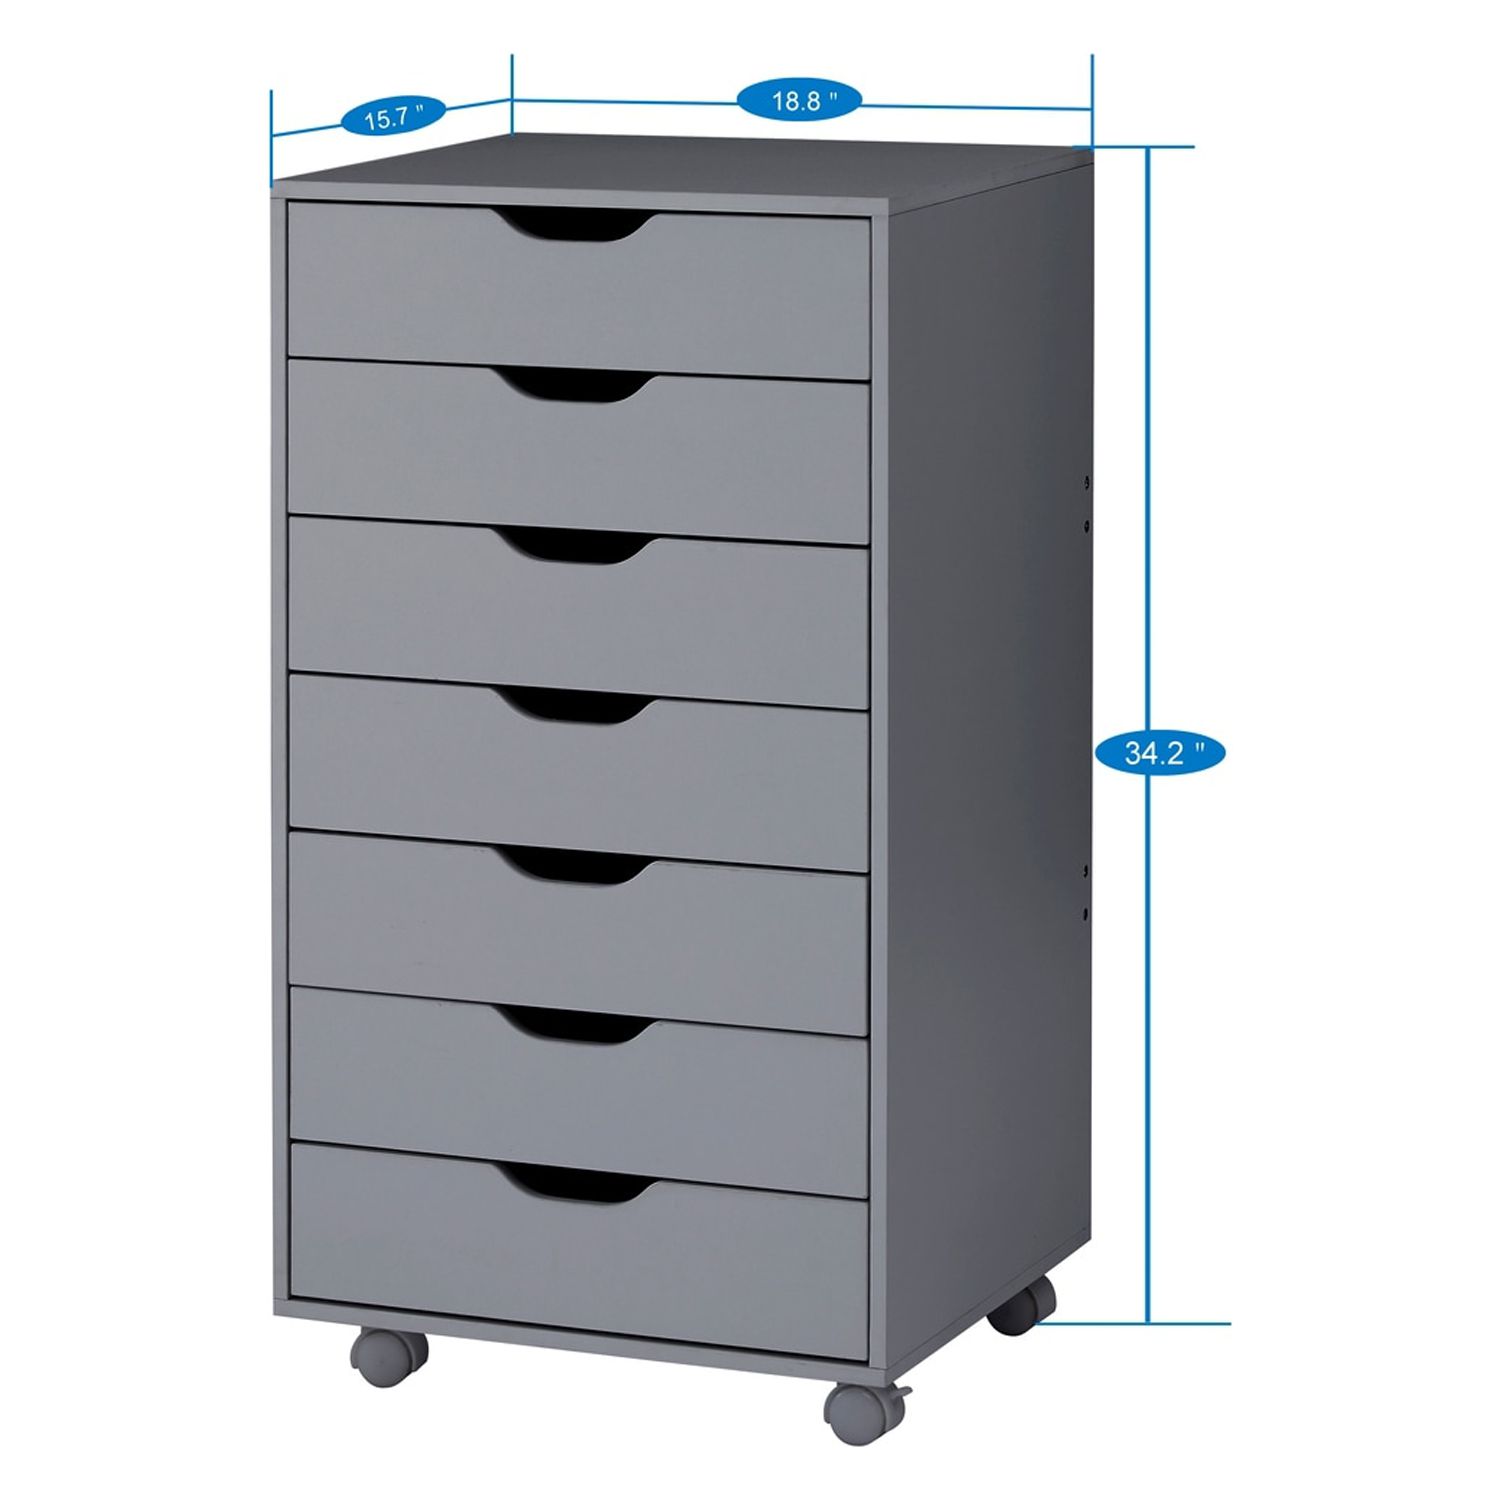 Office File Cabinets Wooden File Cabinets for Home Office Lateral File Cabinet File Cabinet Mobile File Storage Drawer Cabinet White - image 2 of 6